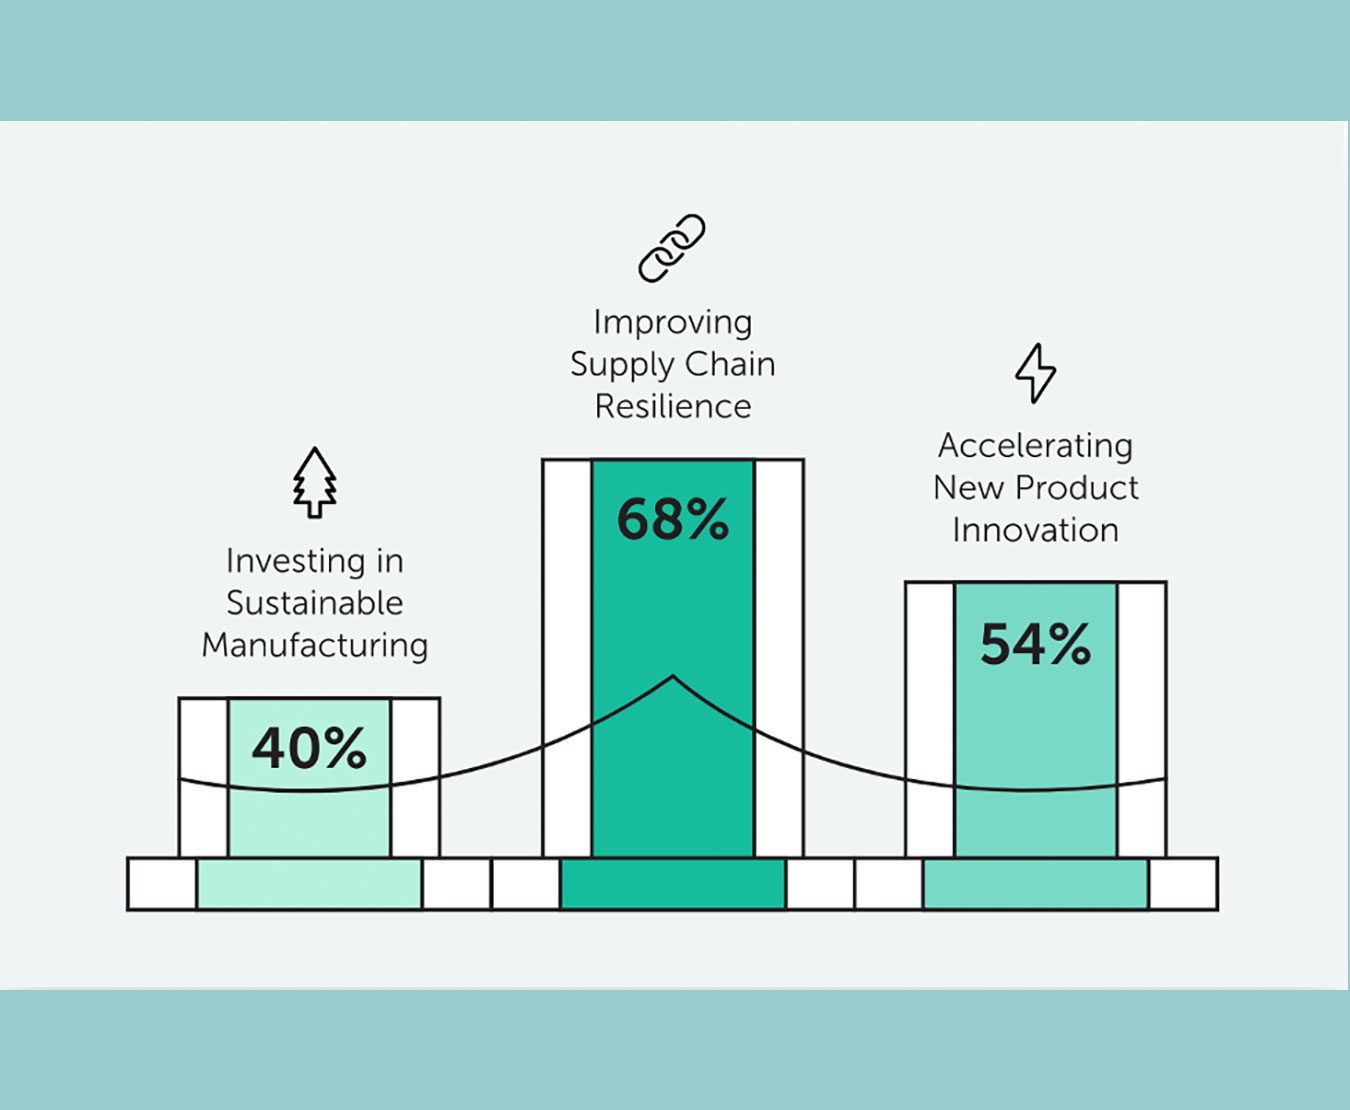 Manufacturing pandemic recovery strategies: 40% investing in sustainable manufacturing; 68% improving supply chain resilience; 54% accelerating new product innovation 